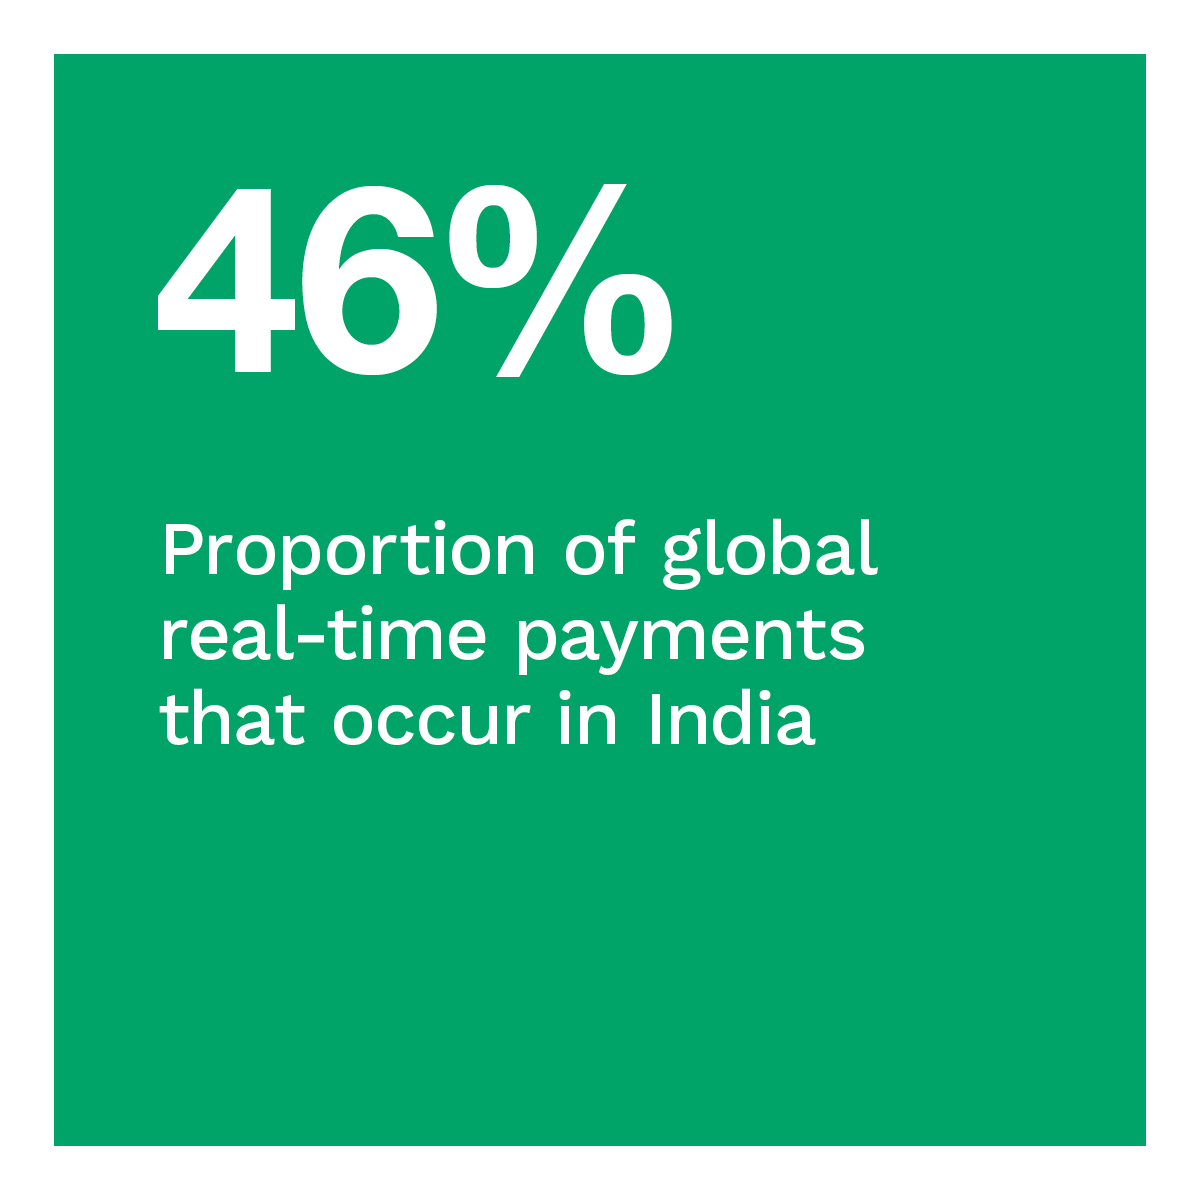 46%: Proportion of global real-time payments that occur in India